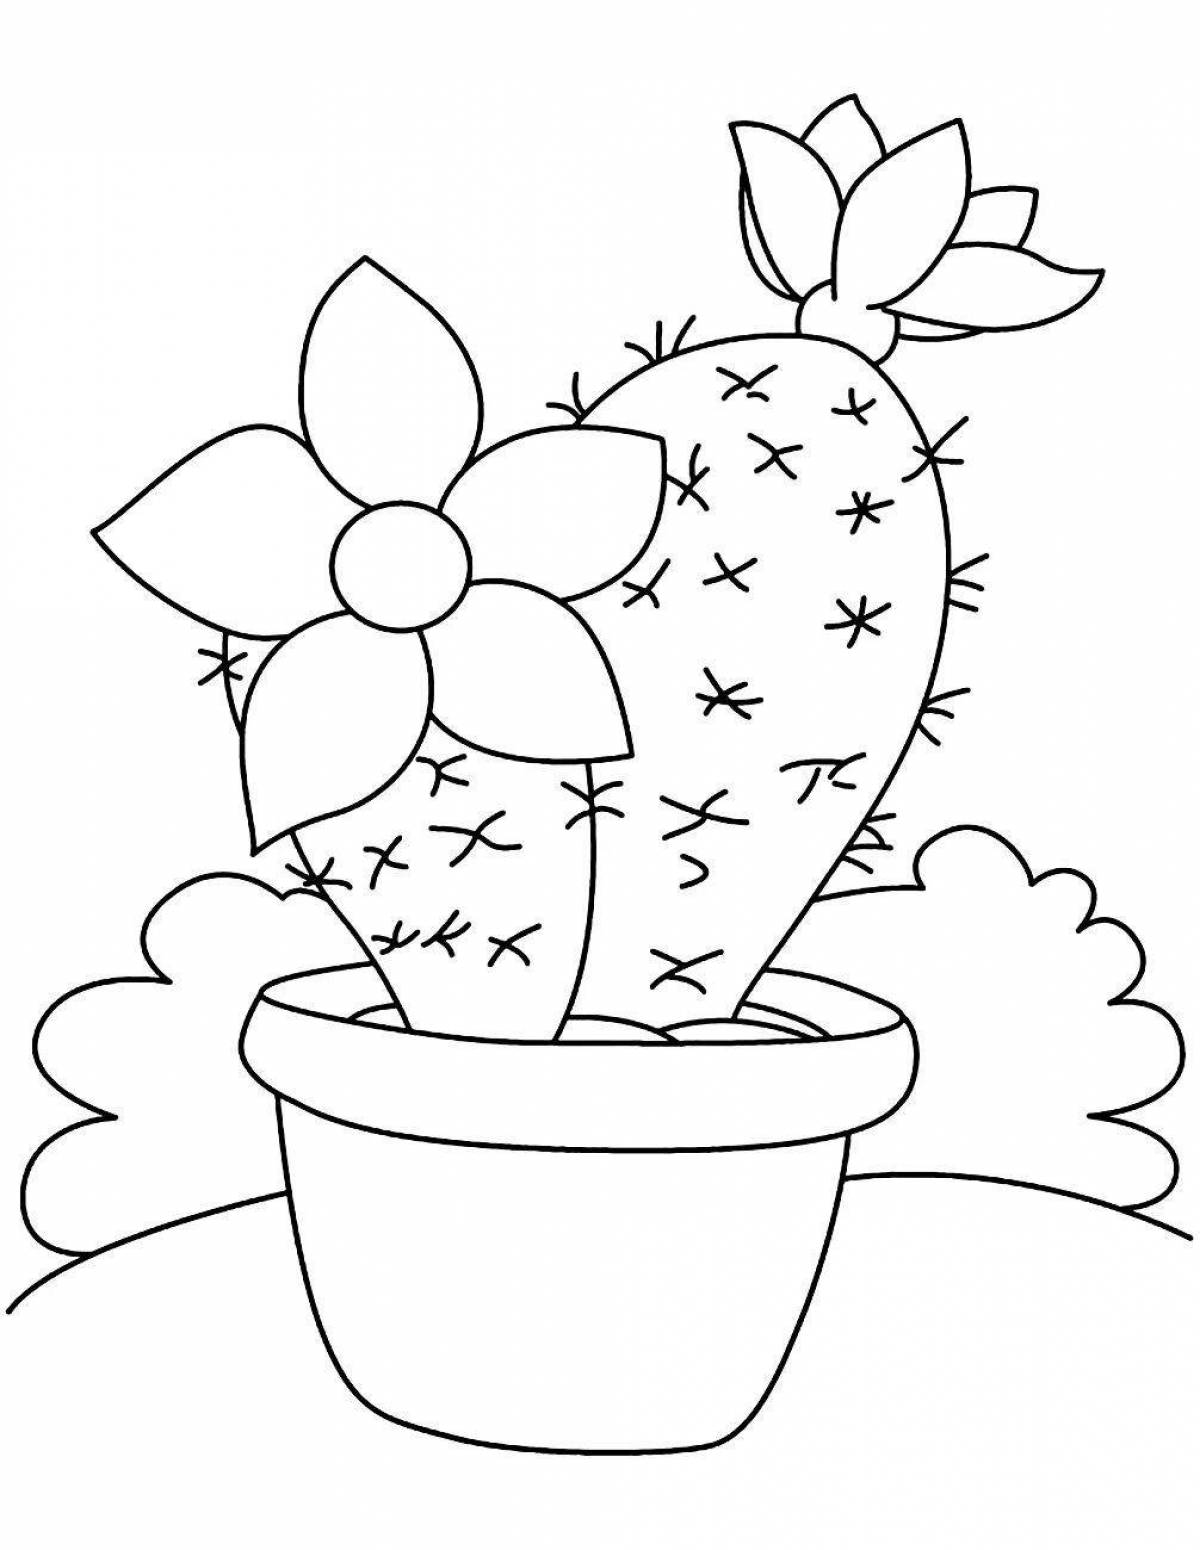 Glorious houseplants coloring pages for kids